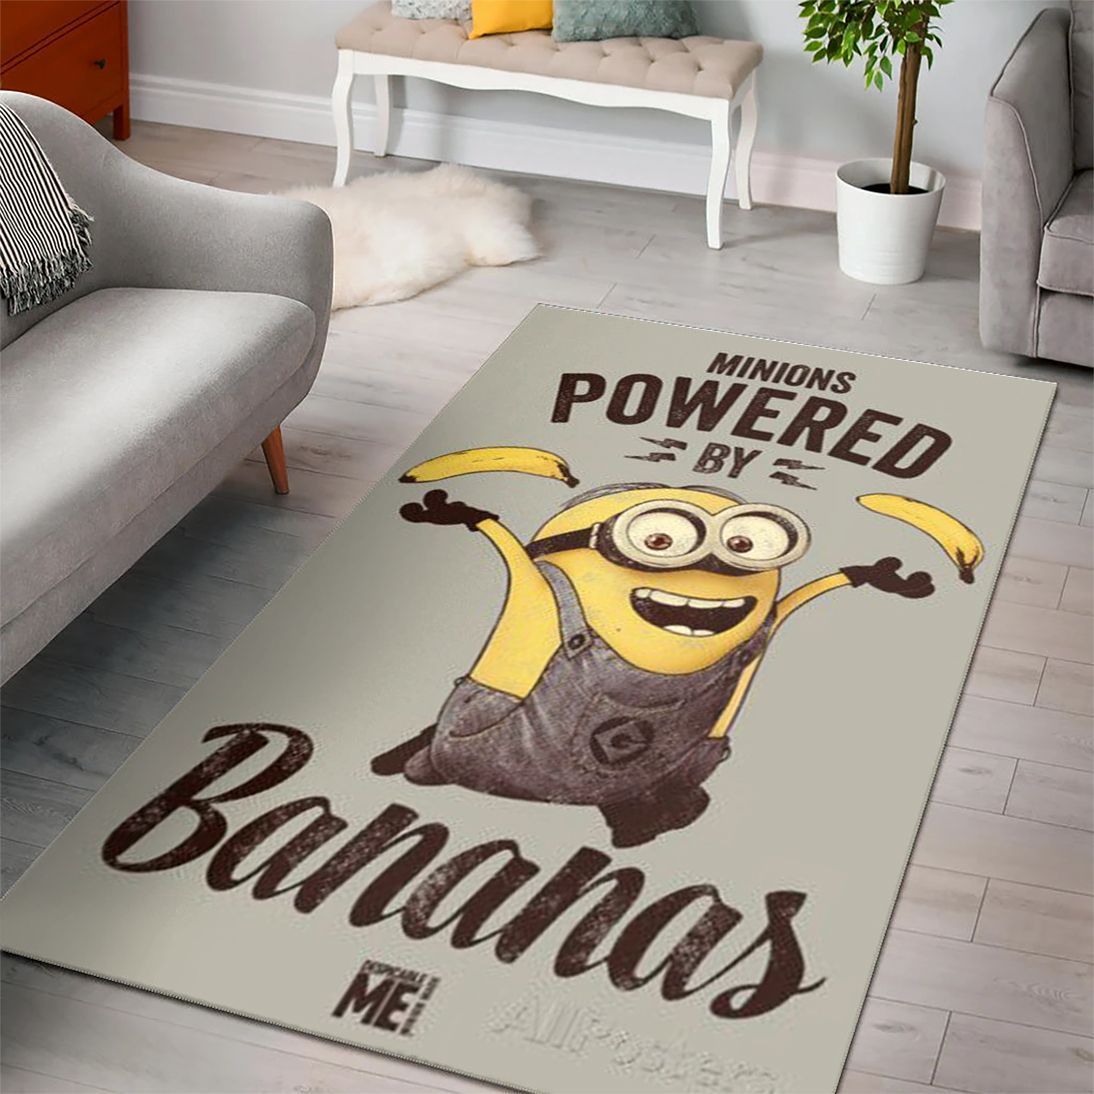 MINIONS DESPICABLE MINIONS CARTOON MOVIES AREA RUGS LIVING ROOM CARPET FLOOR DECOR THE US DECOR – CUSTOM SIZE AND PRINTING